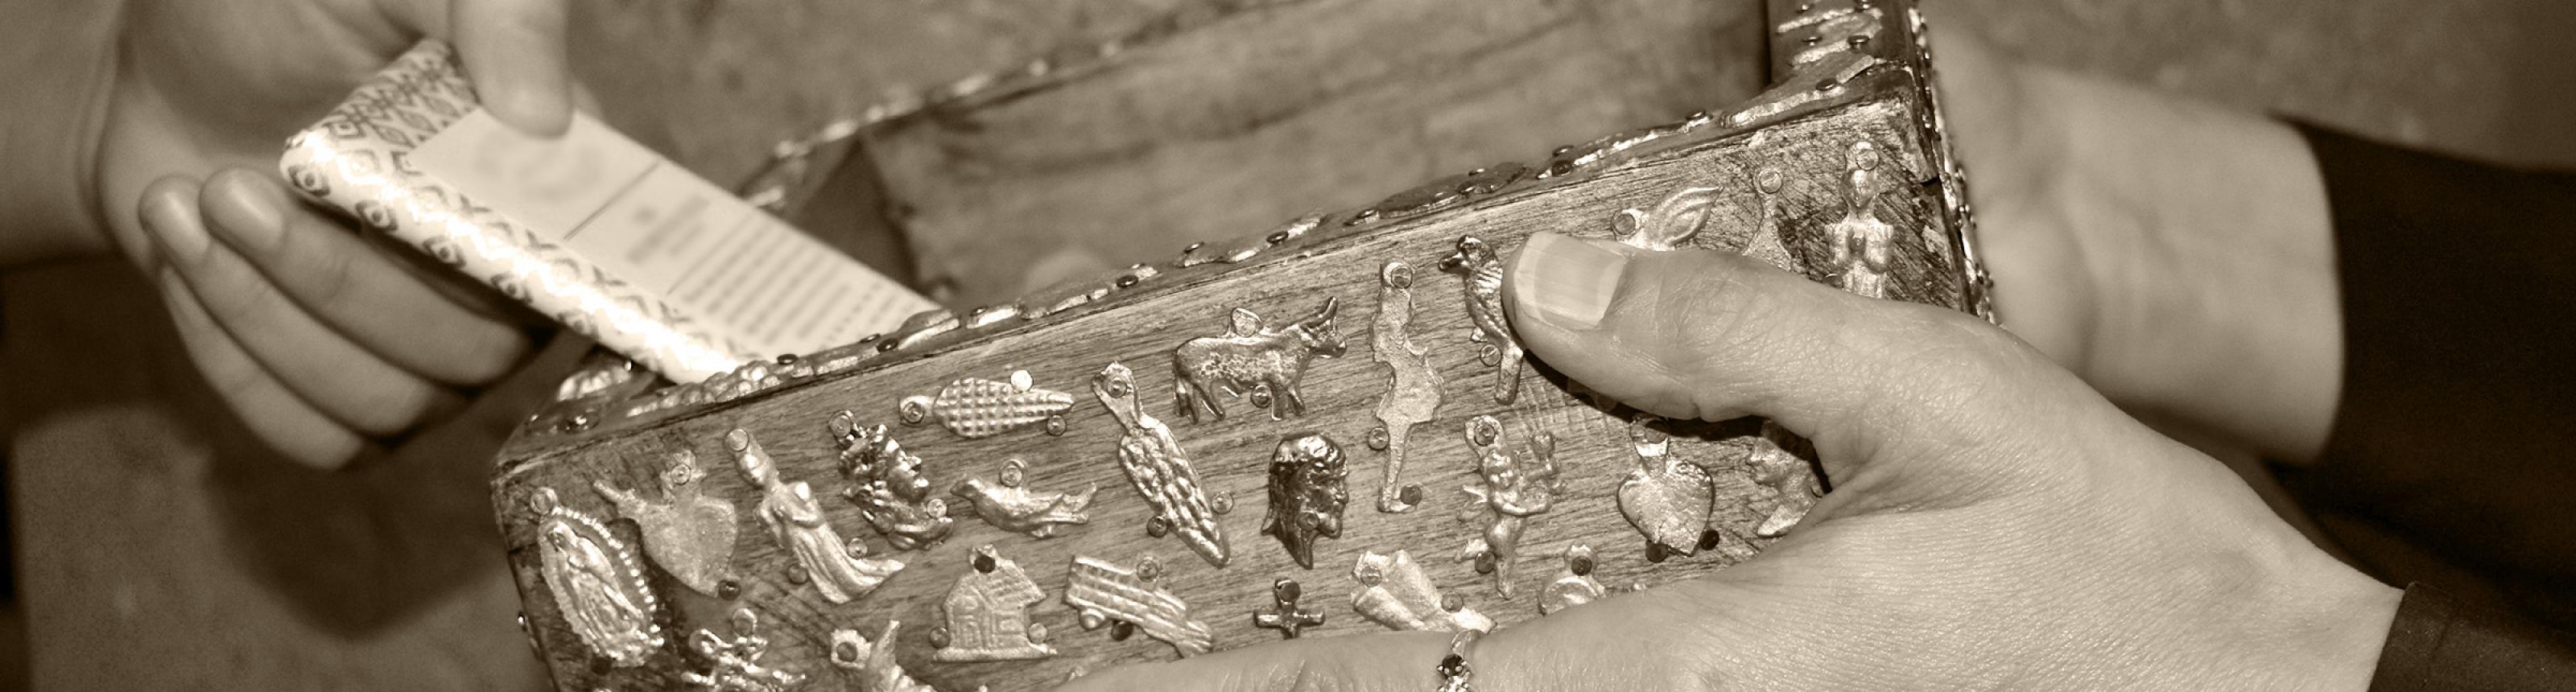 close-up of hands passing an offering box